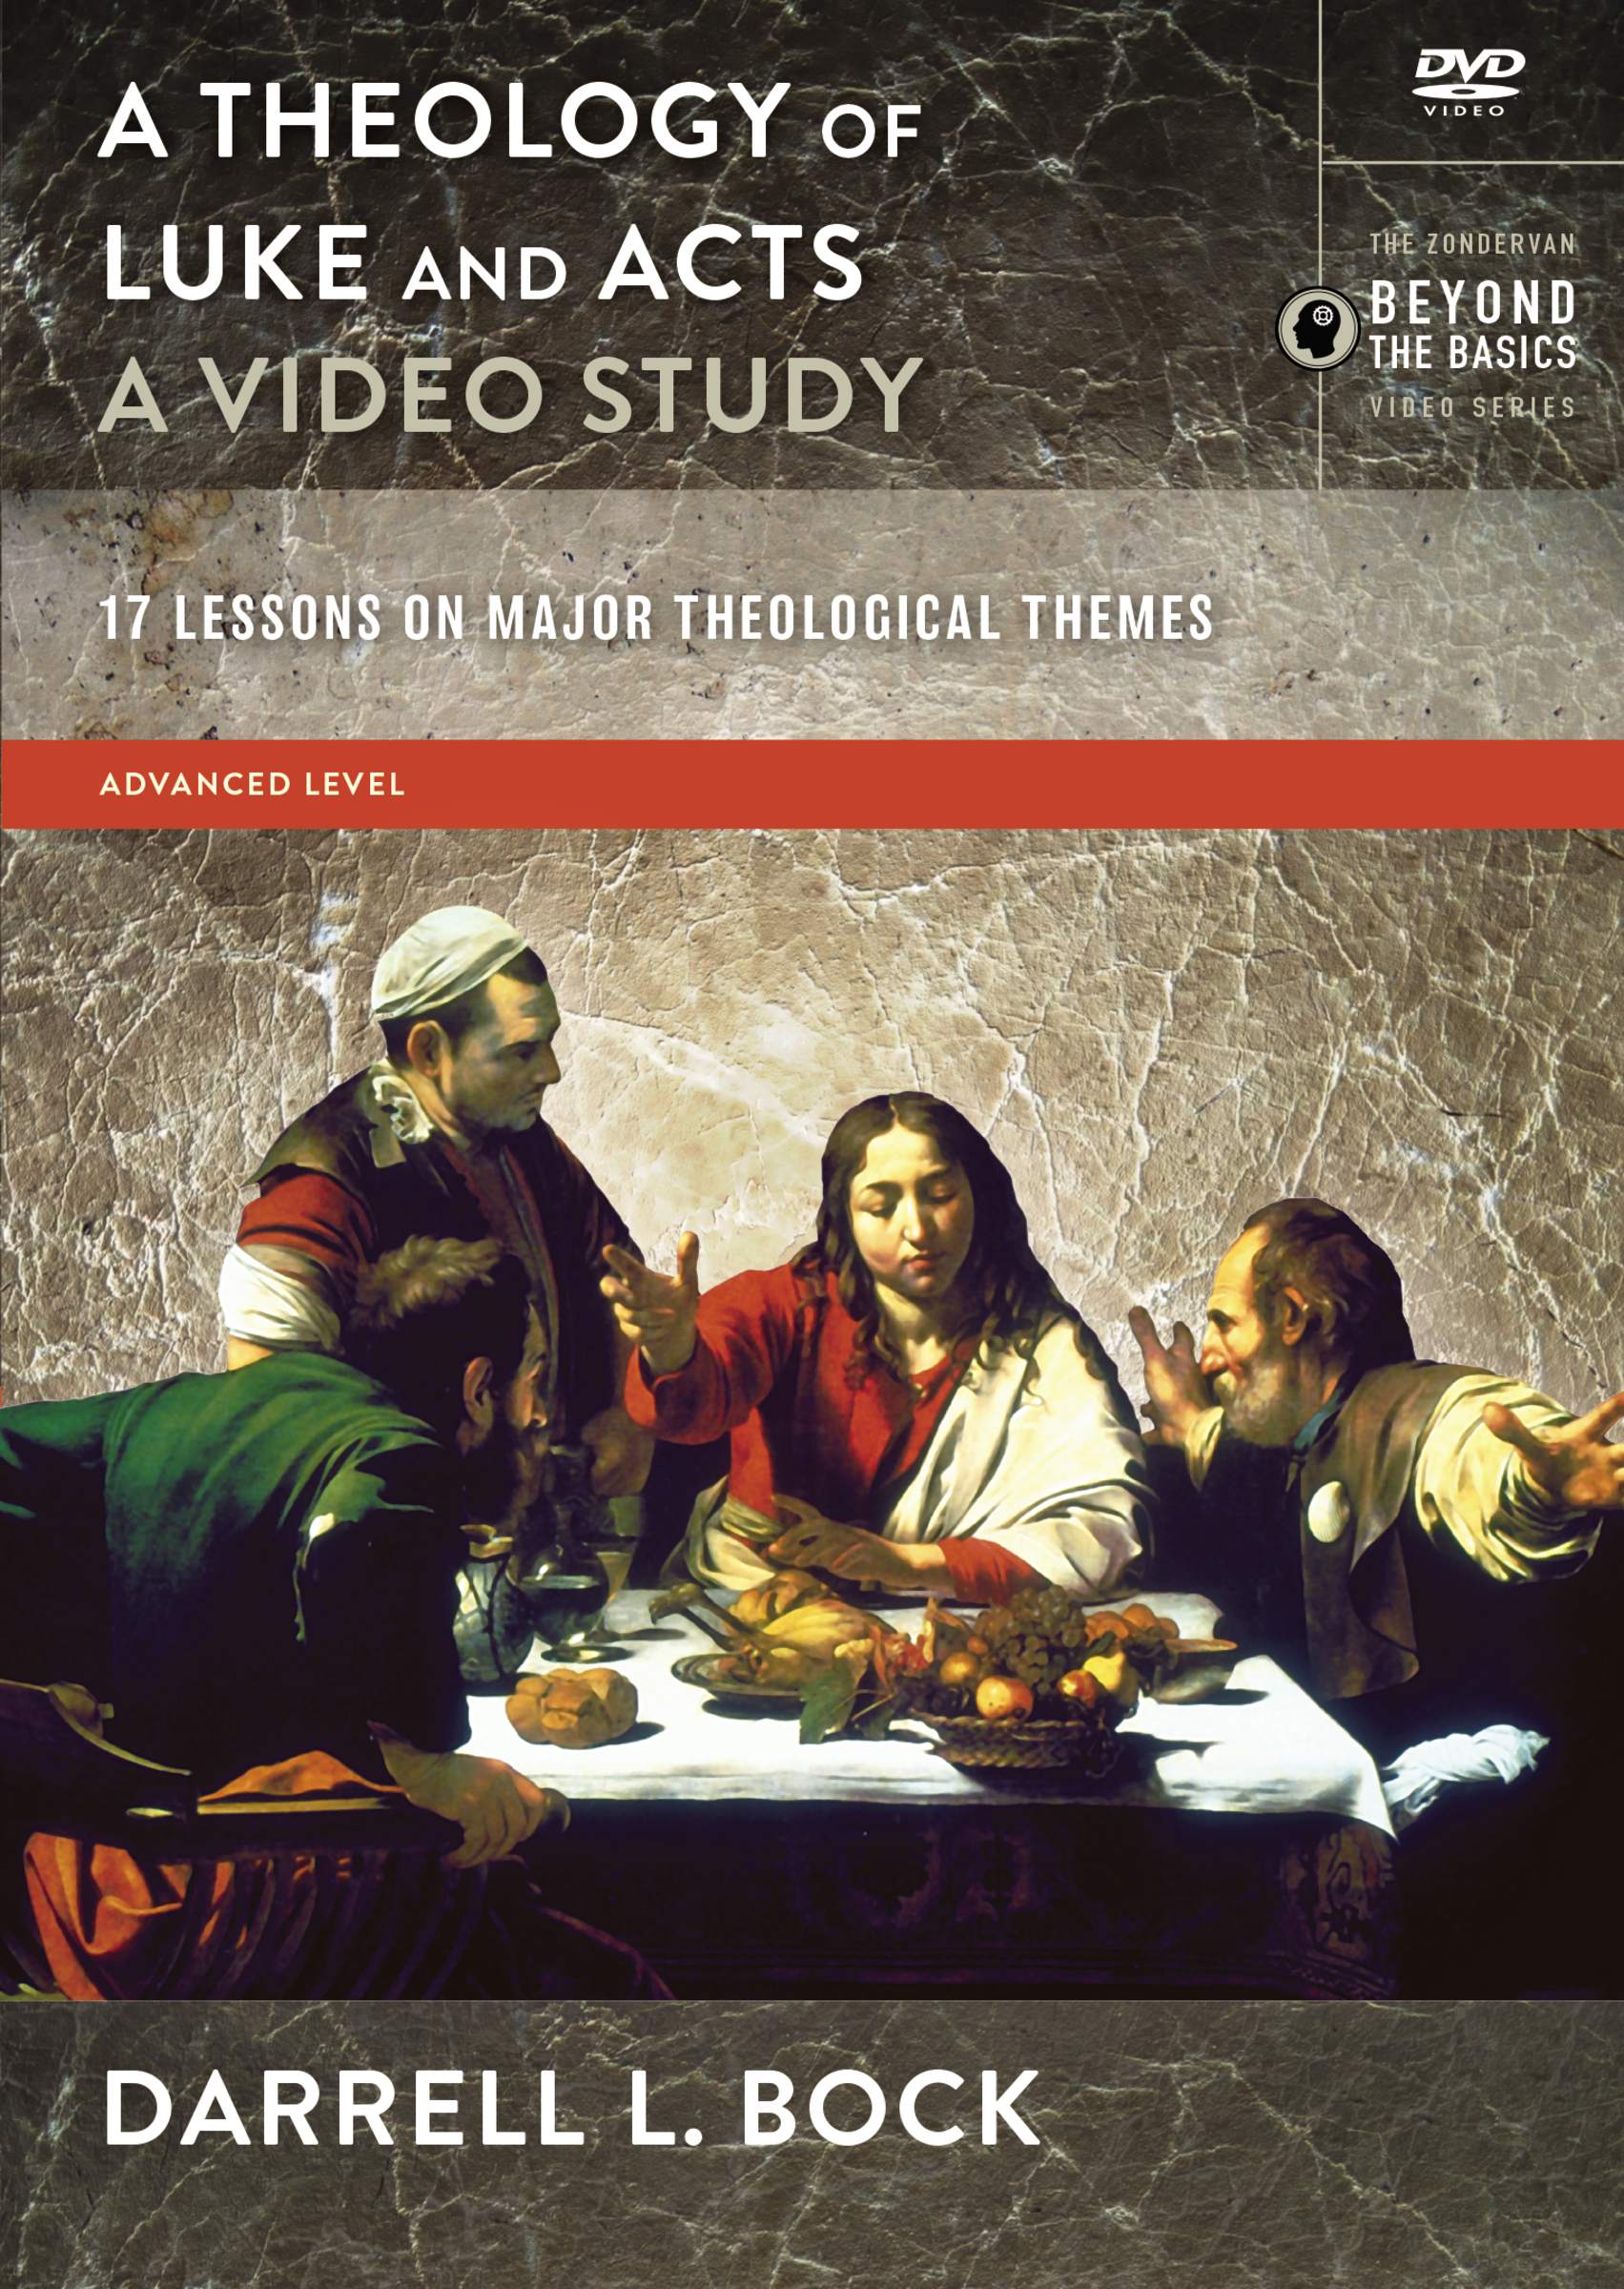 A Theology of Luke and Acts, A Video Study